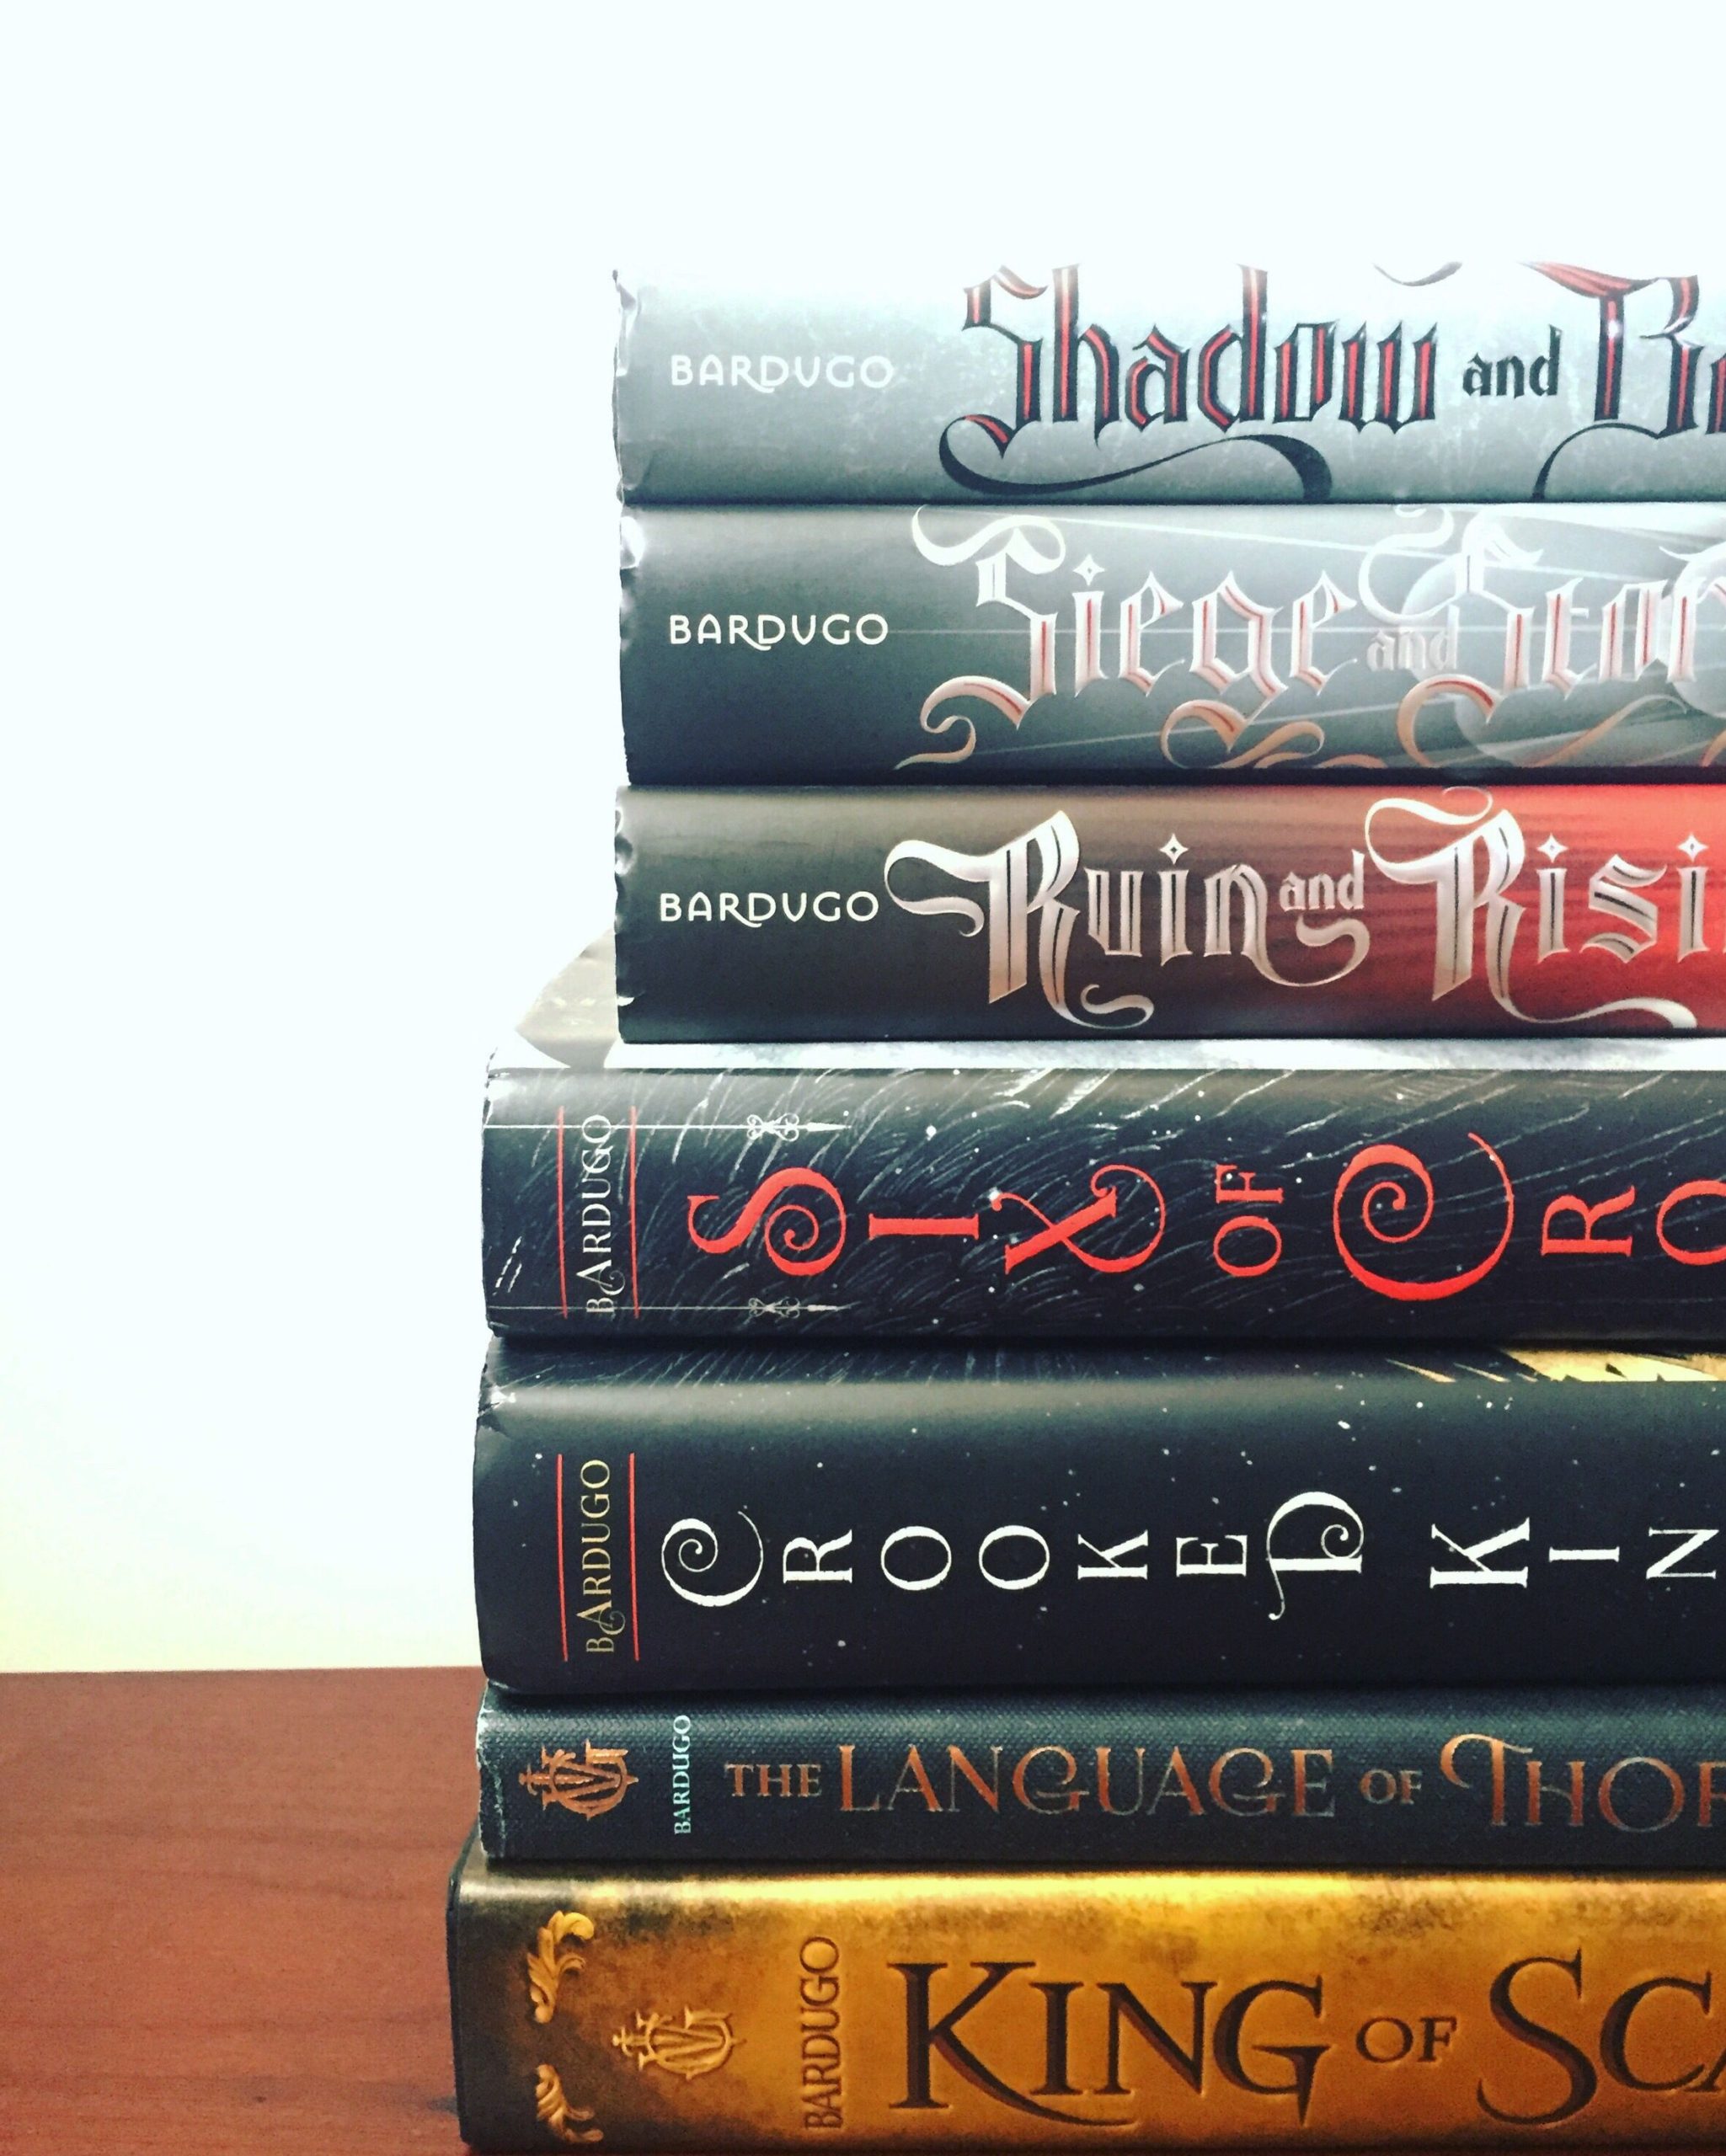 A photo shows a stack of books by author Leigh Bardugo. "Thebookcovergirls." Leigh Bardugo Novels. 2019.